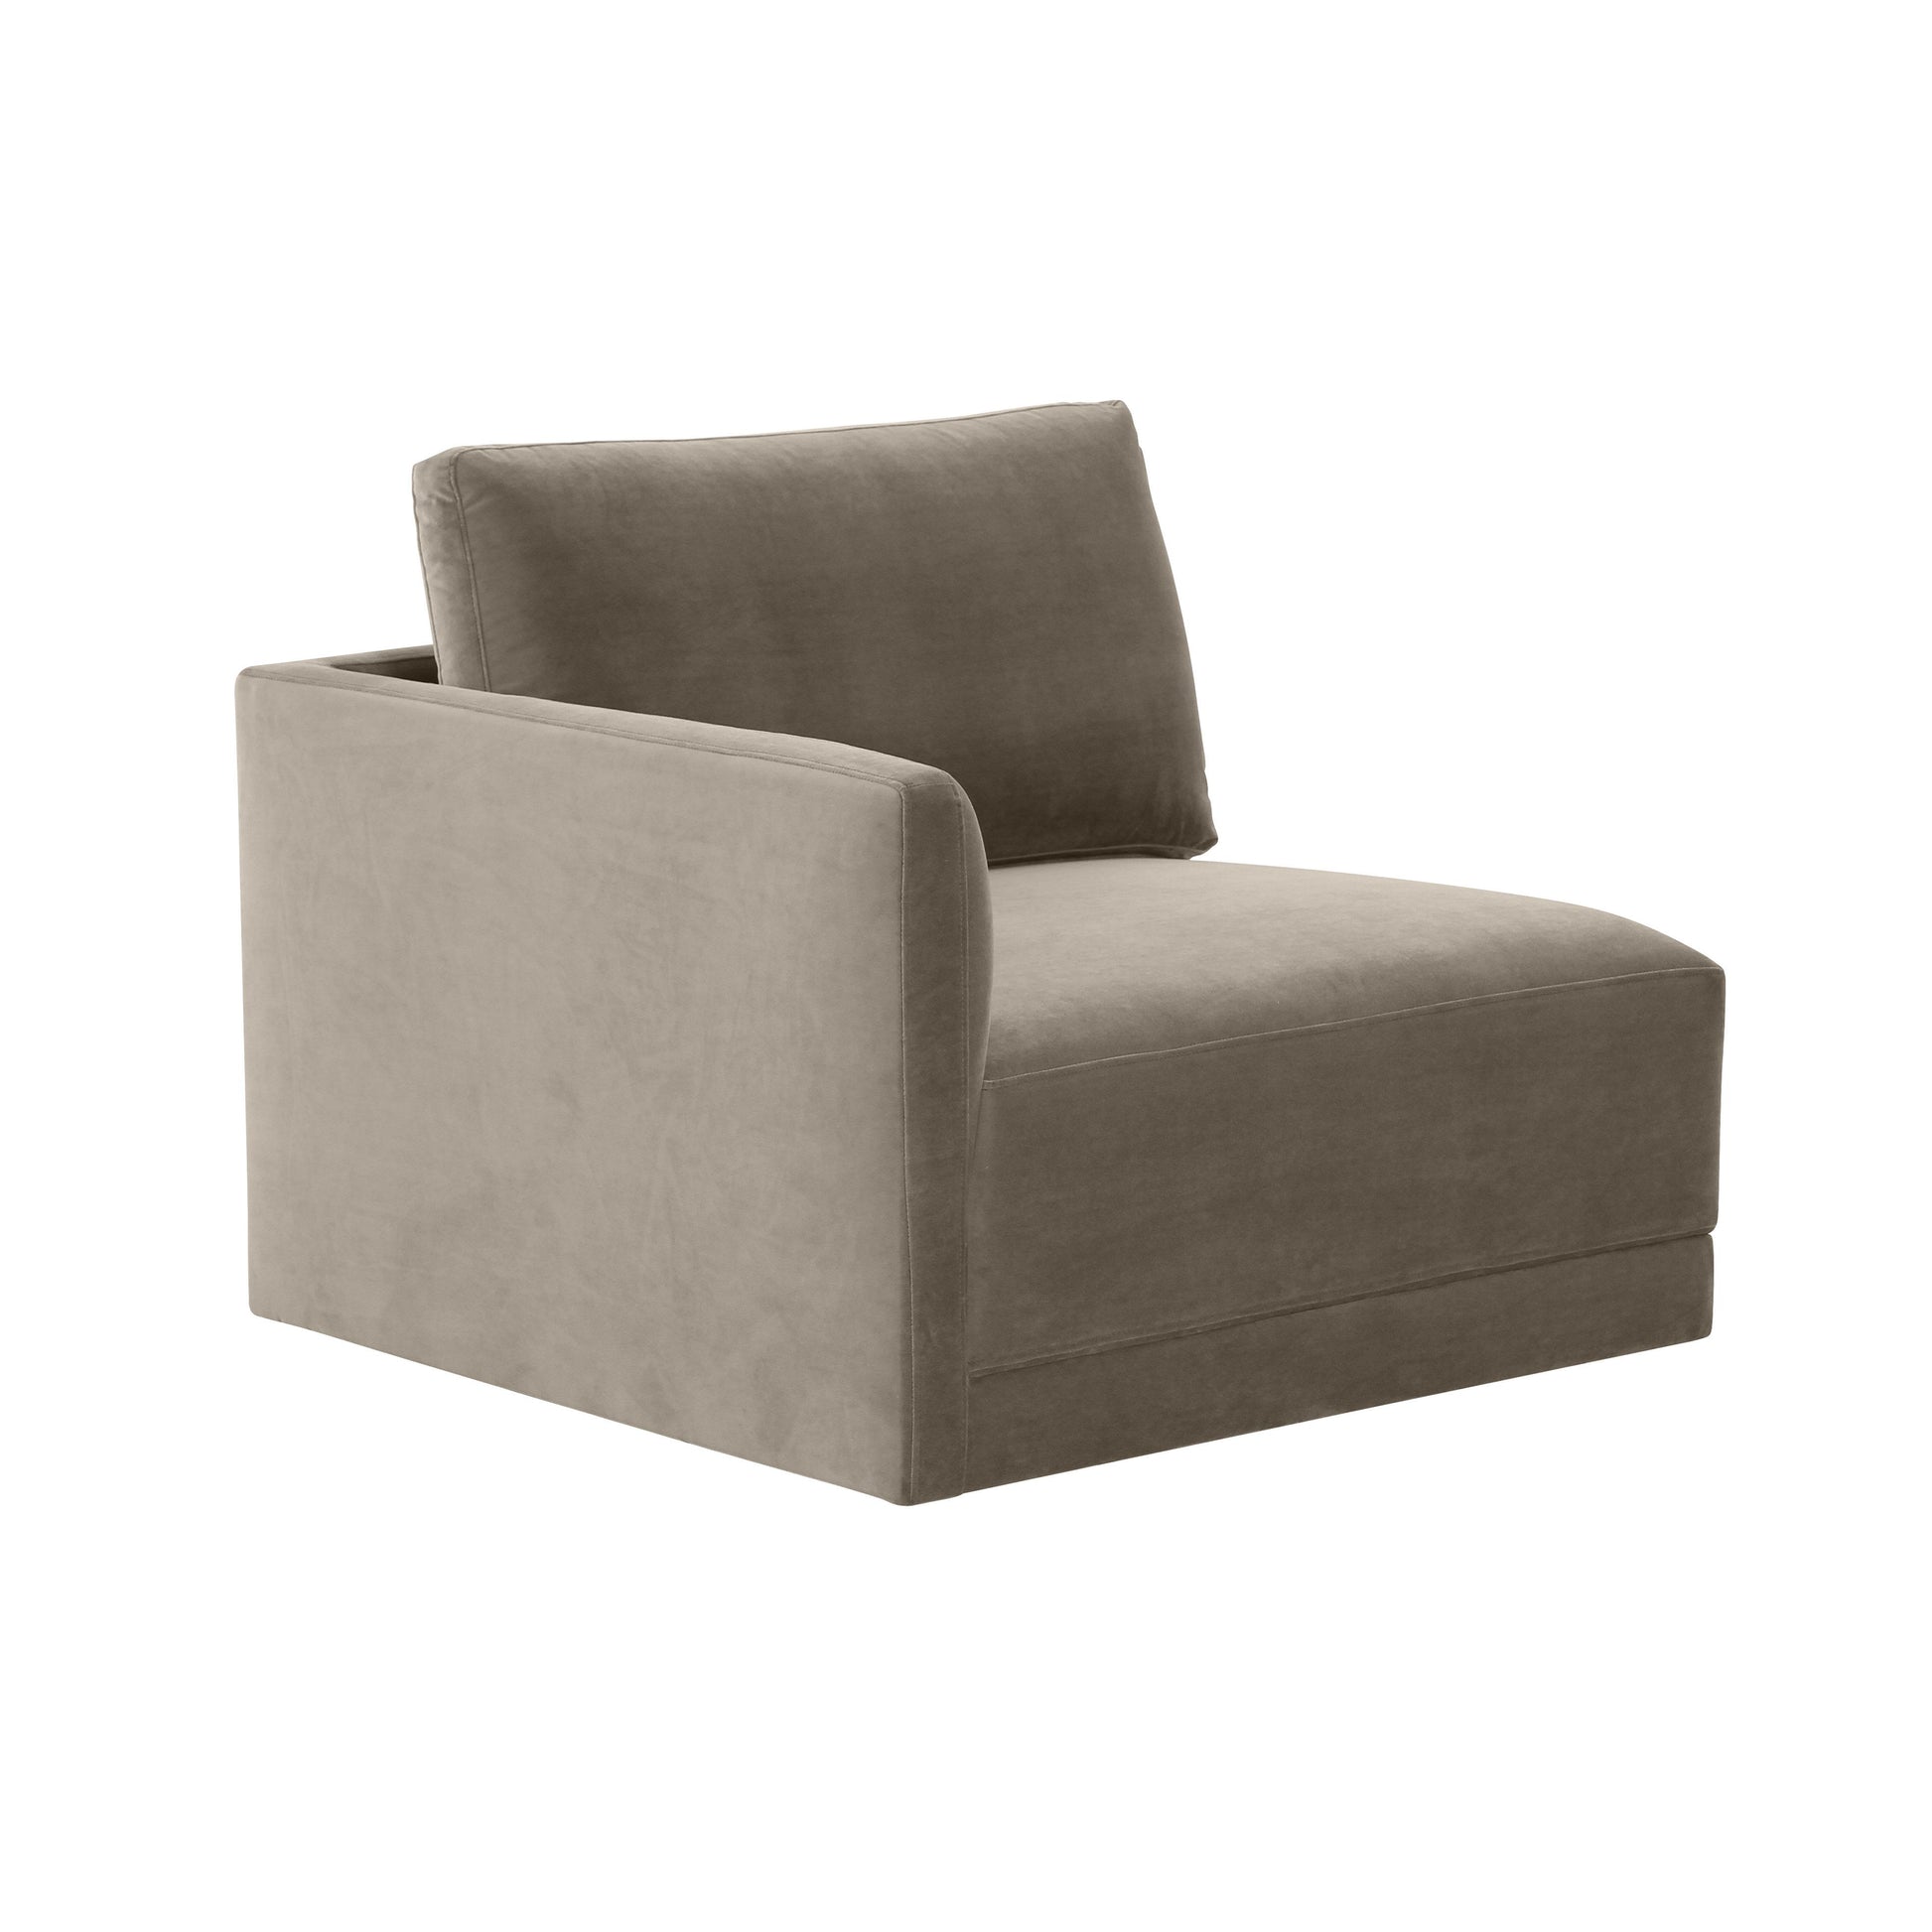 Tov Furniture Willow Taupe LAF Corner Chair